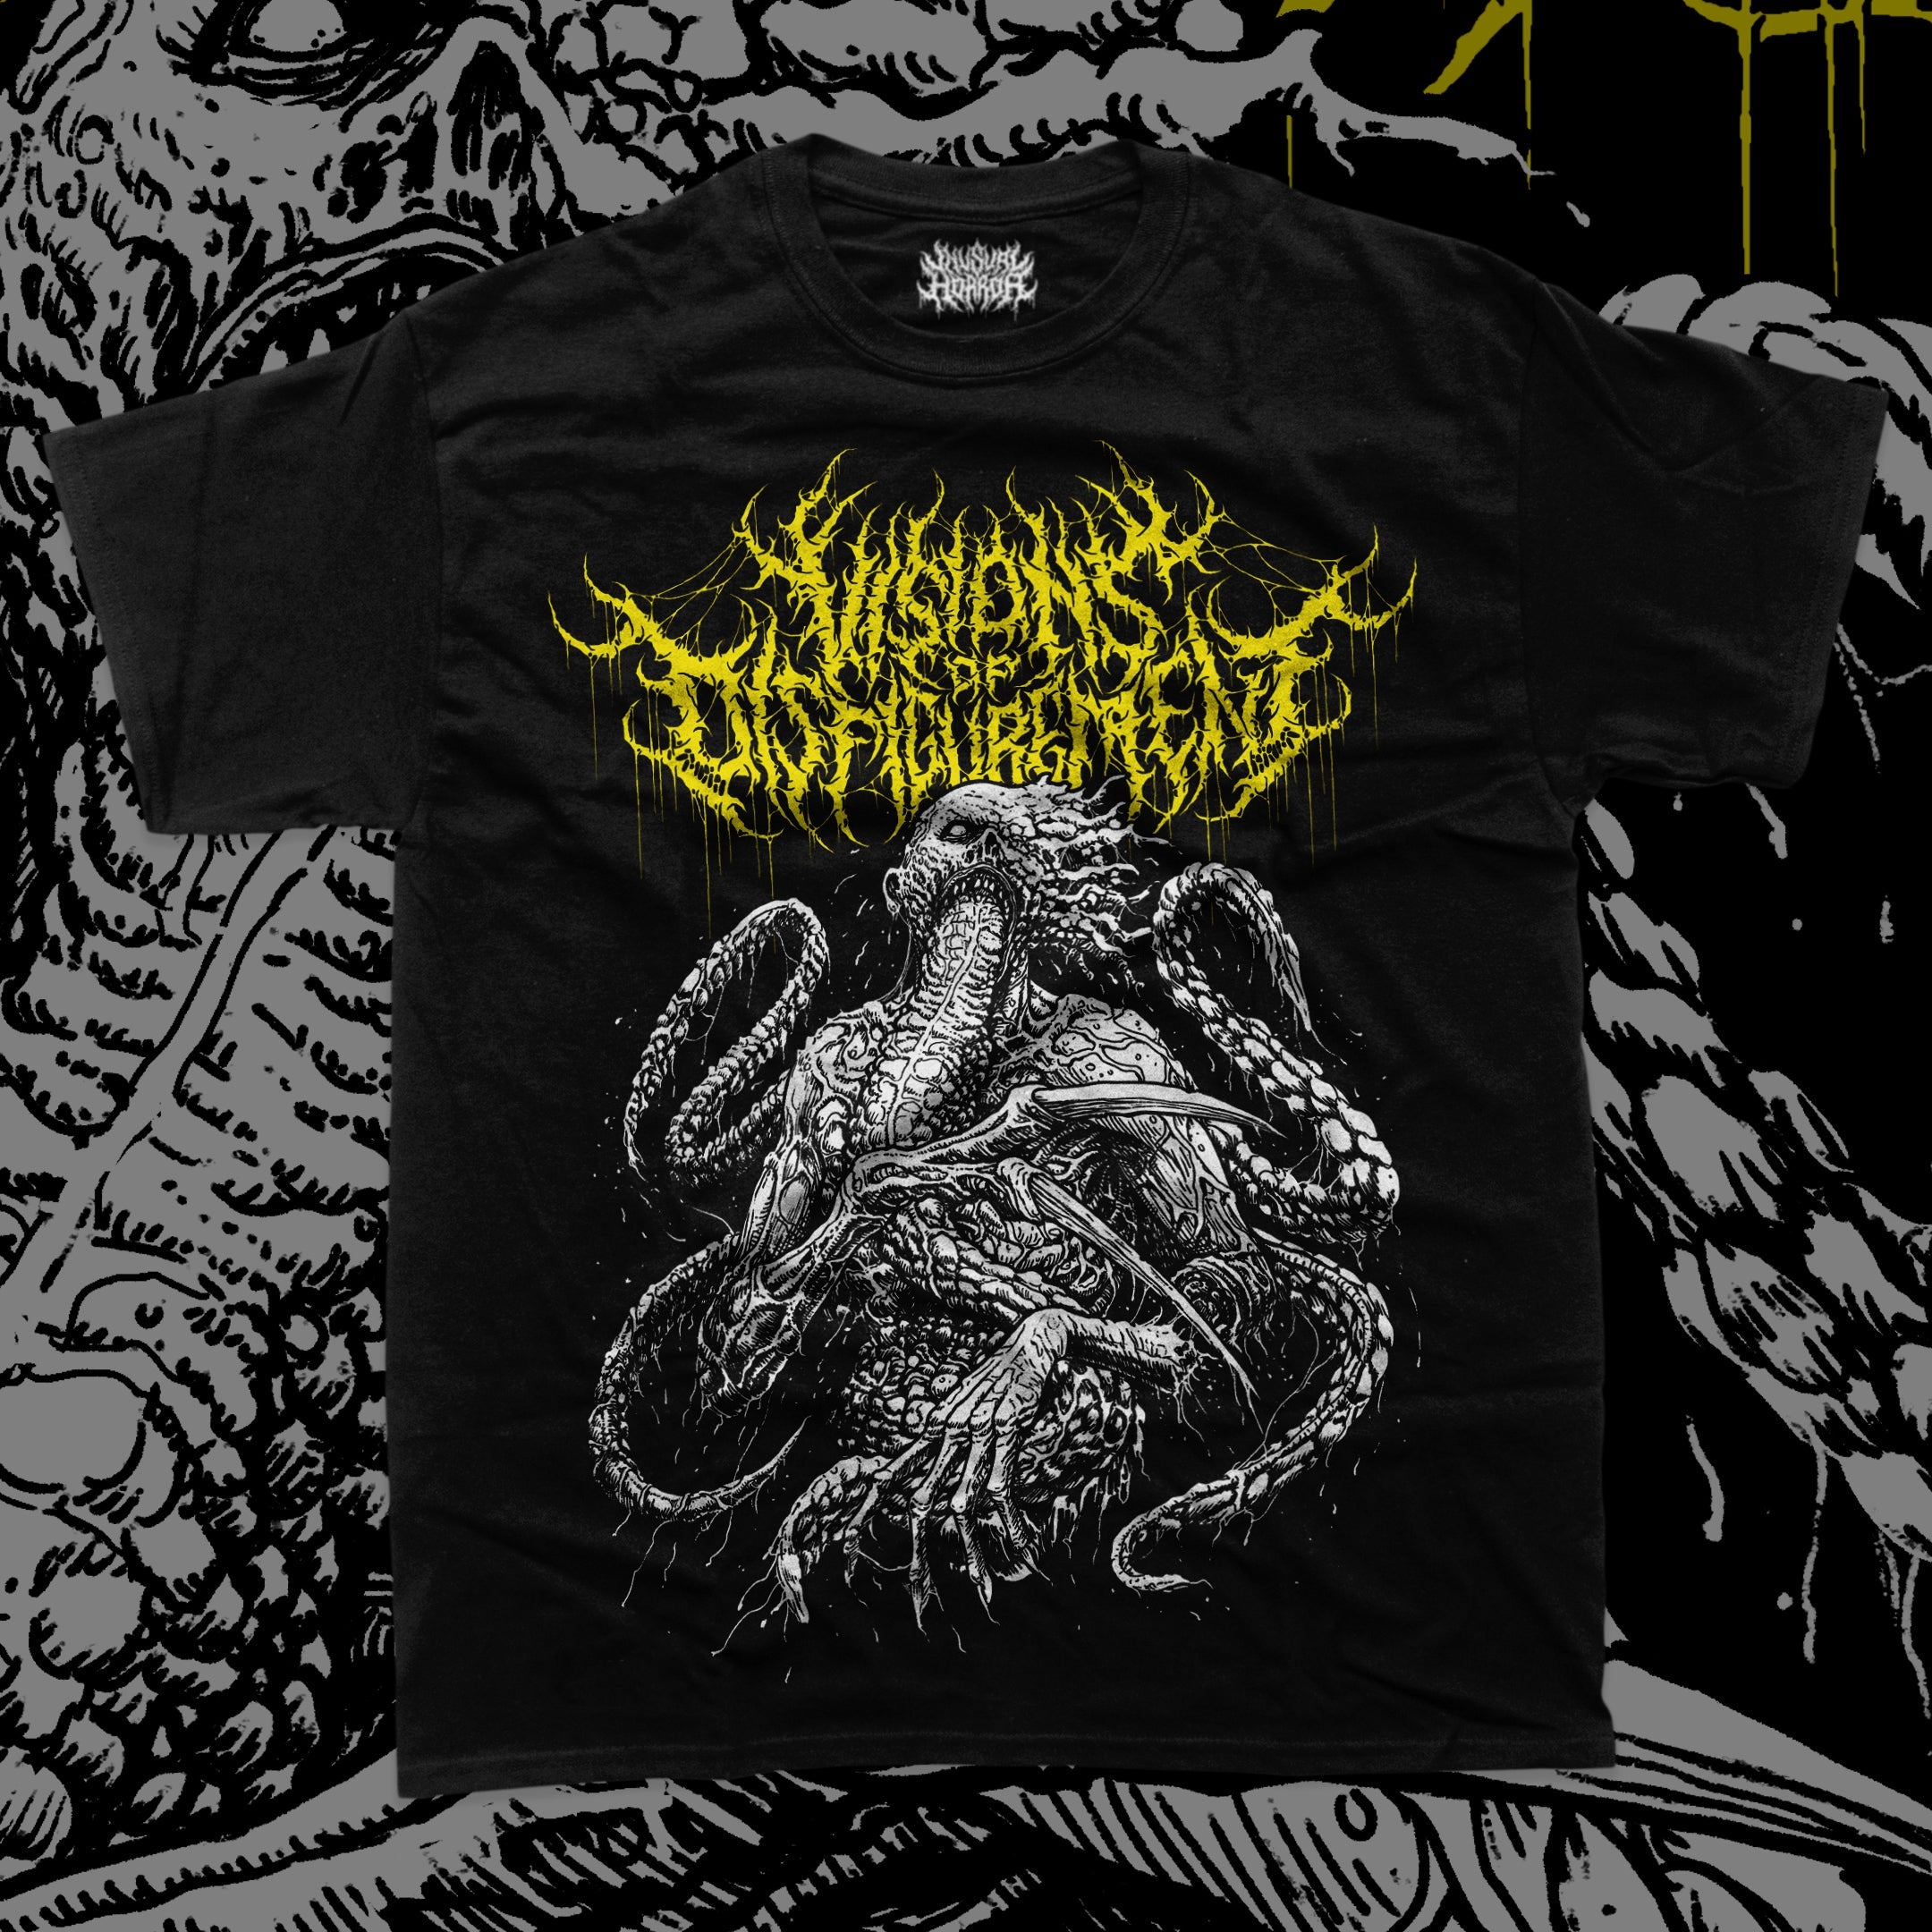 T-Shirt - Visions Of Disfigurement - Galactic Infection - T-Shirt